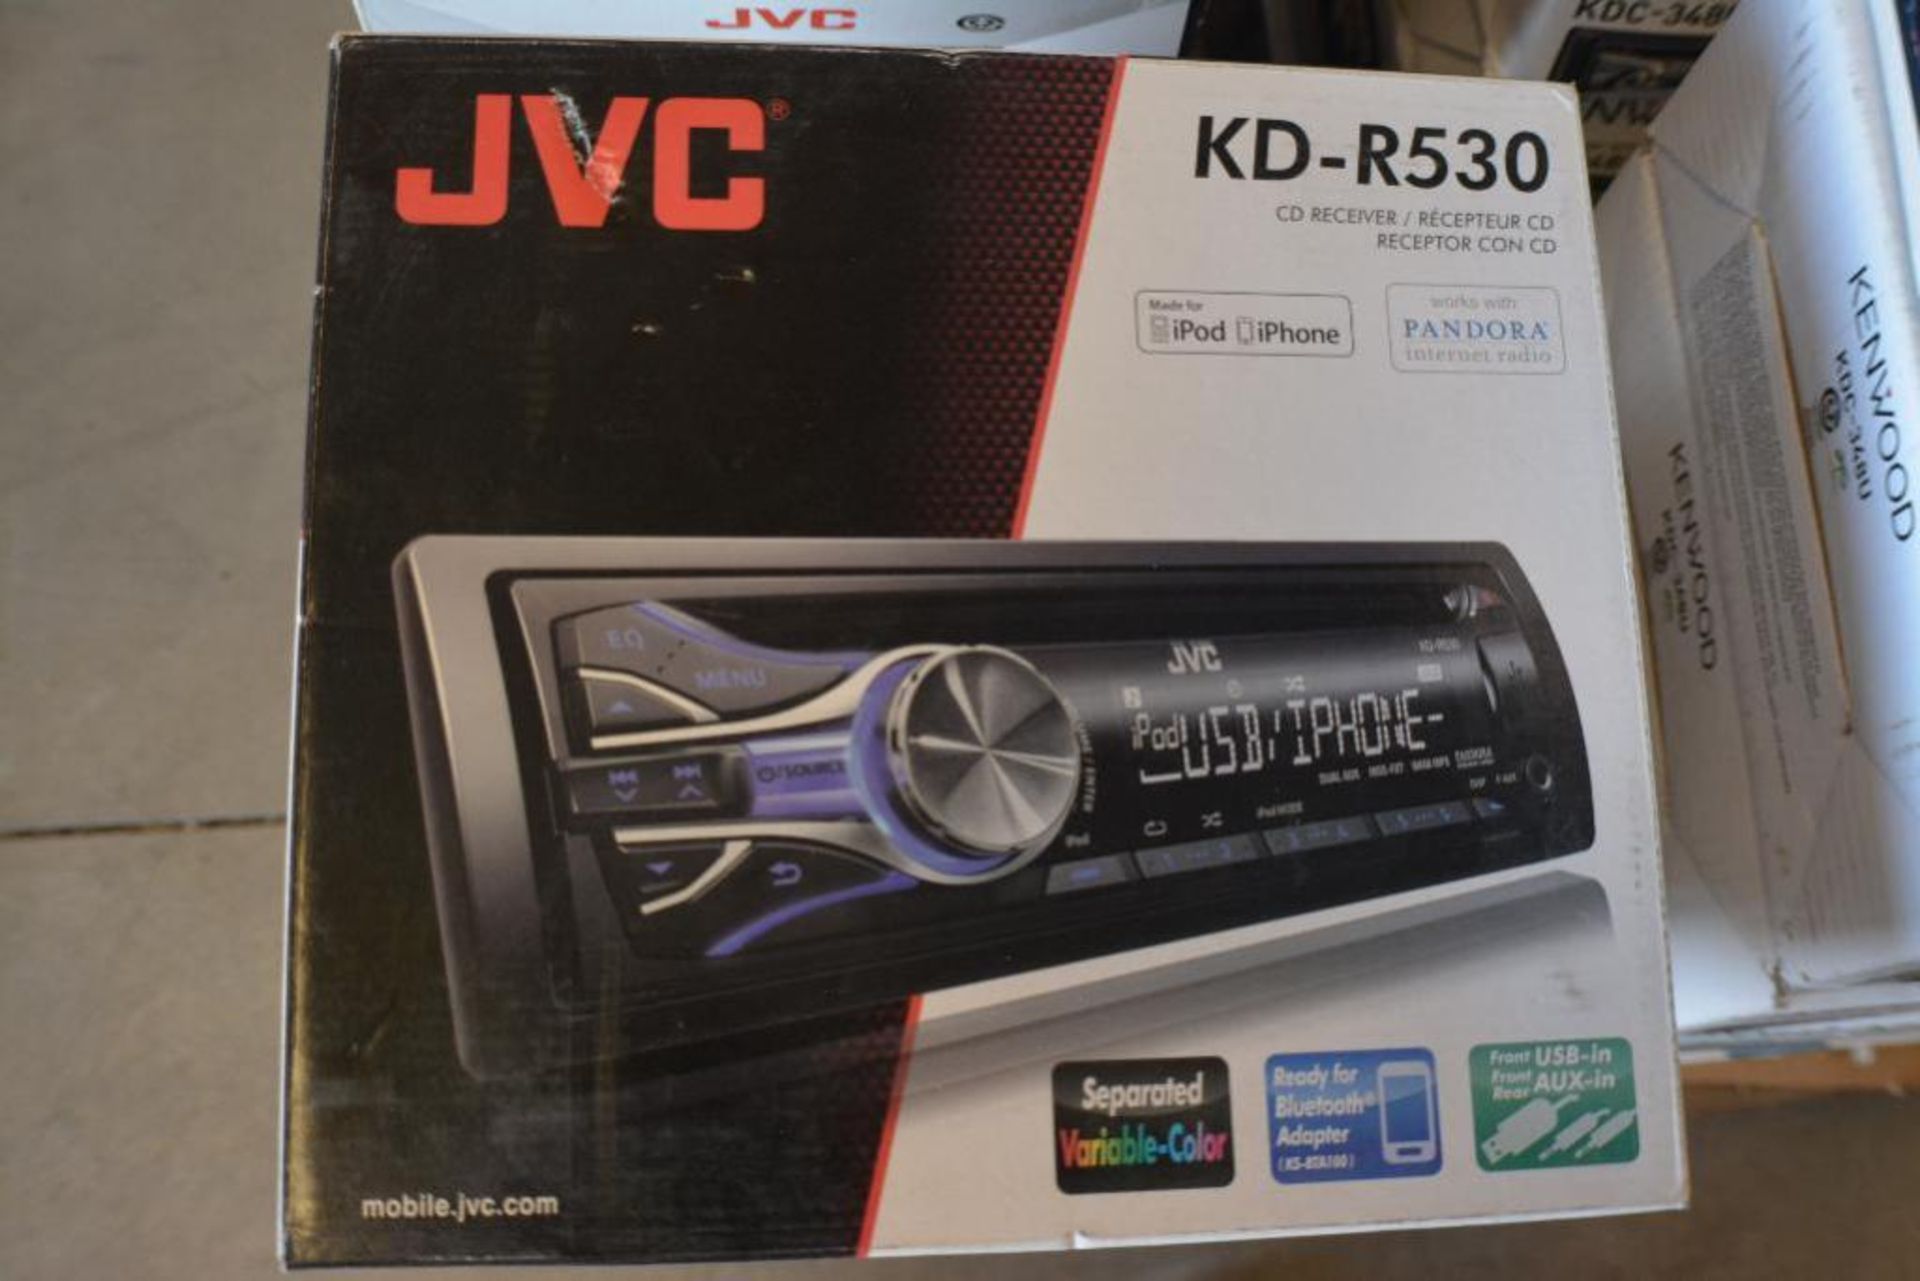 JVC Car Stereo Model KD-R530.CD-Receiver + Ready for Bluetooth + USB and Aux.(Some stereos not in or